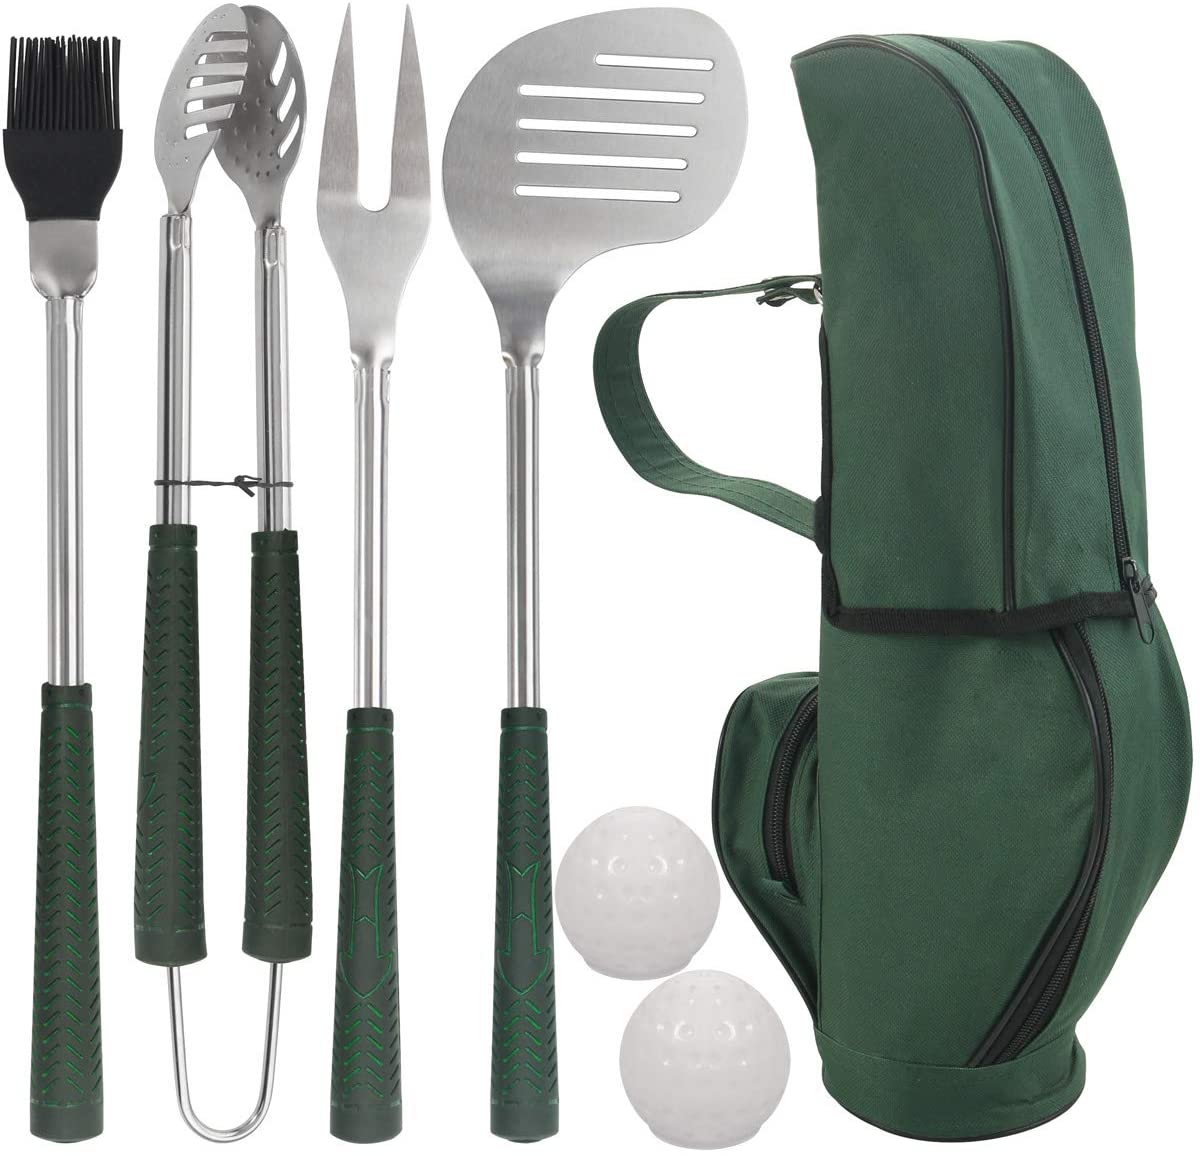 Get your dad this novelty golf grilling set for Father's Day